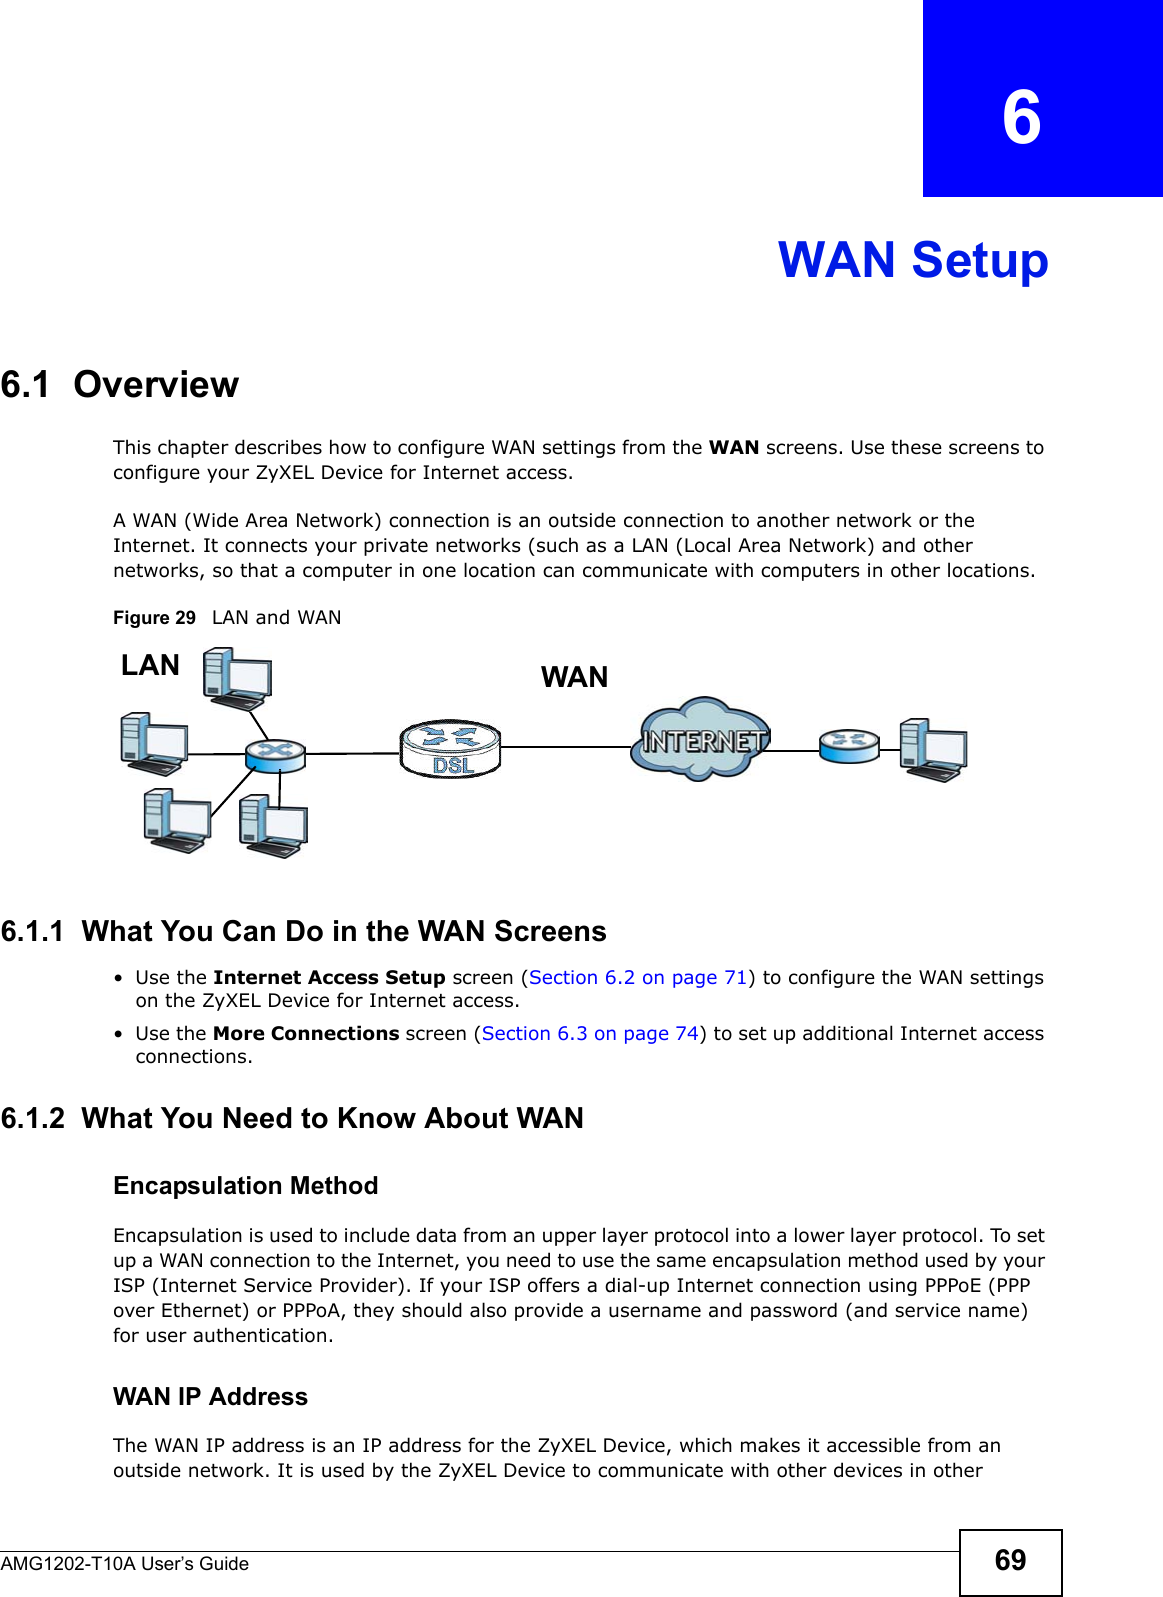 AMG1202-T10A User’s Guide 69CHAPTER   6WAN Setup6.1  OverviewThis chapter describes how to configure WAN settings from the WAN screens. Use these screens to configure your ZyXEL Device for Internet access.A WAN (Wide Area Network) connection is an outside connection to another network or the Internet. It connects your private networks (such as a LAN (Local Area Network) and other networks, so that a computer in one location can communicate with computers in other locations.Figure 29   LAN and WAN6.1.1  What You Can Do in the WAN Screens•Use the Internet Access Setup screen (Section 6.2 on page 71) to configure the WAN settings on the ZyXEL Device for Internet access.•Use the More Connections screen (Section 6.3 on page 74) to set up additional Internet access connections.6.1.2  What You Need to Know About WANEncapsulation MethodEncapsulation is used to include data from an upper layer protocol into a lower layer protocol. To set up a WAN connection to the Internet, you need to use the same encapsulation method used by your ISP (Internet Service Provider). If your ISP offers a dial-up Internet connection using PPPoE (PPP over Ethernet) or PPPoA, they should also provide a username and password (and service name) for user authentication.WAN IP AddressThe WAN IP address is an IP address for the ZyXEL Device, which makes it accessible from an outside network. It is used by the ZyXEL Device to communicate with other devices in other WANLAN